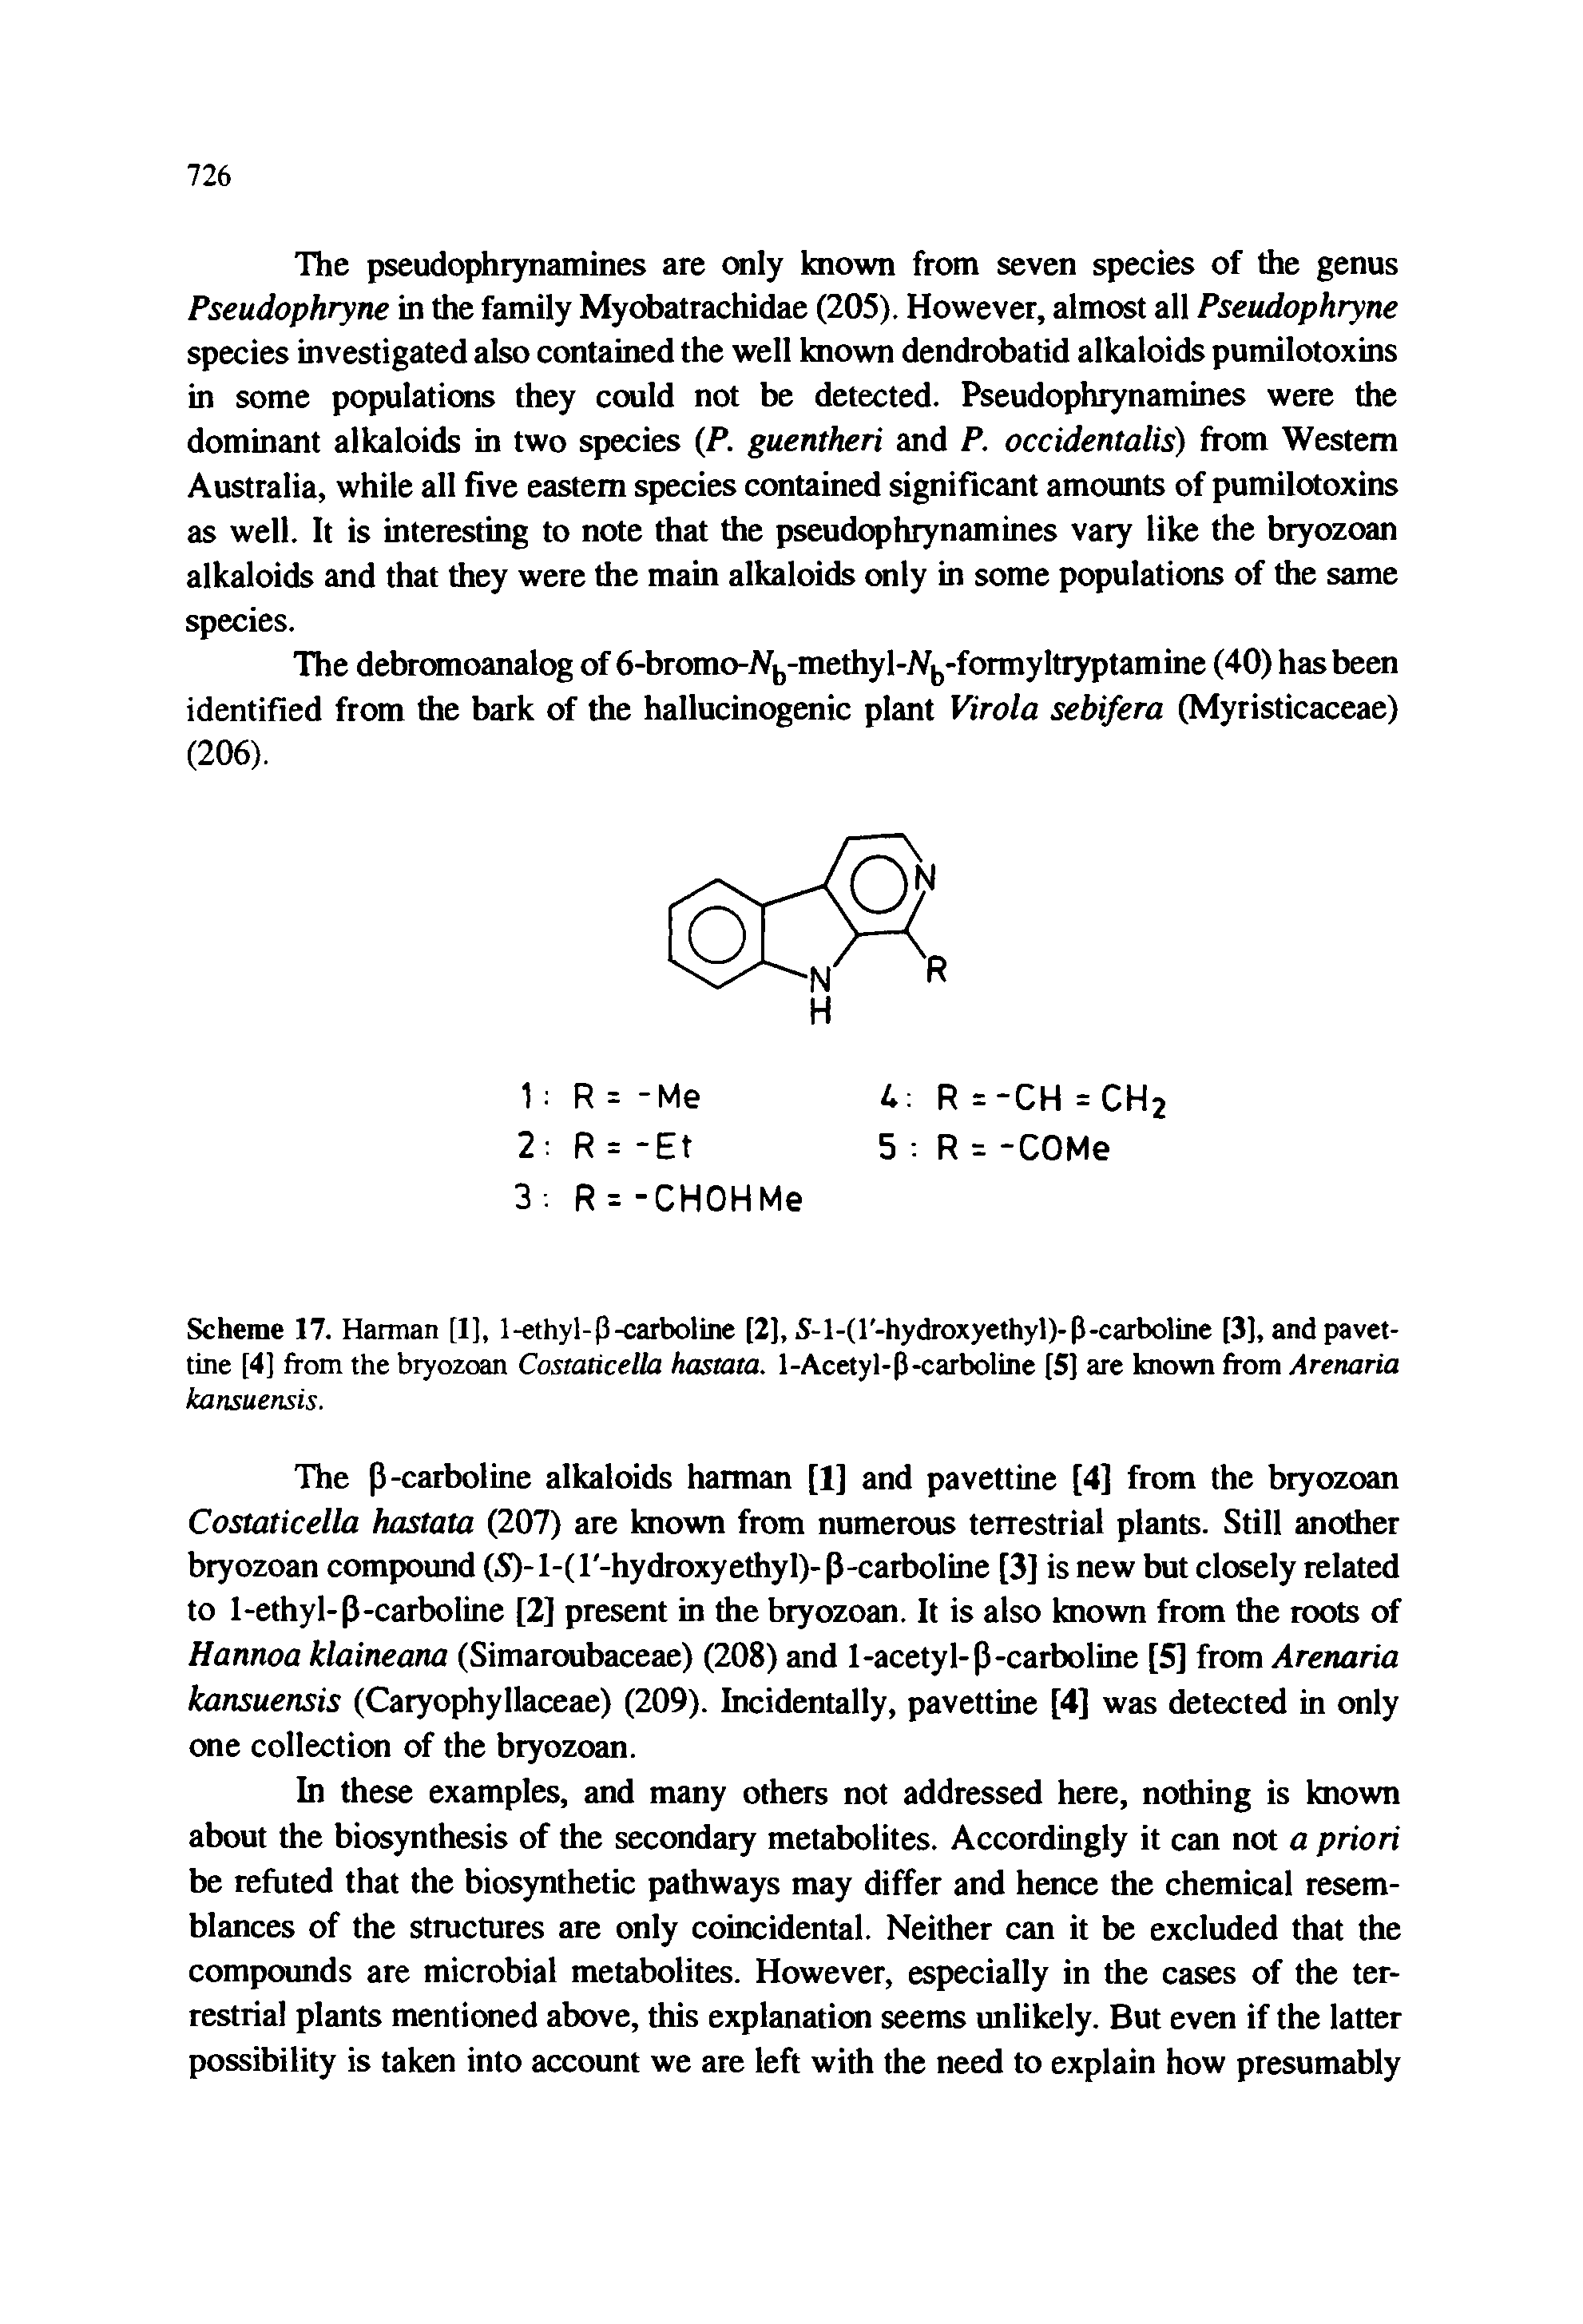 Scheme 17. Hannan [1], 1-ethyl-p-carboline [2], S-l-(l -hydroxyethyl)-P-carboline [3], and pavet-tine [4] from the bryozoan Costaticella hastata. 1-Acetyl-P-carboline [5] are known from Arenaria kansuensis.